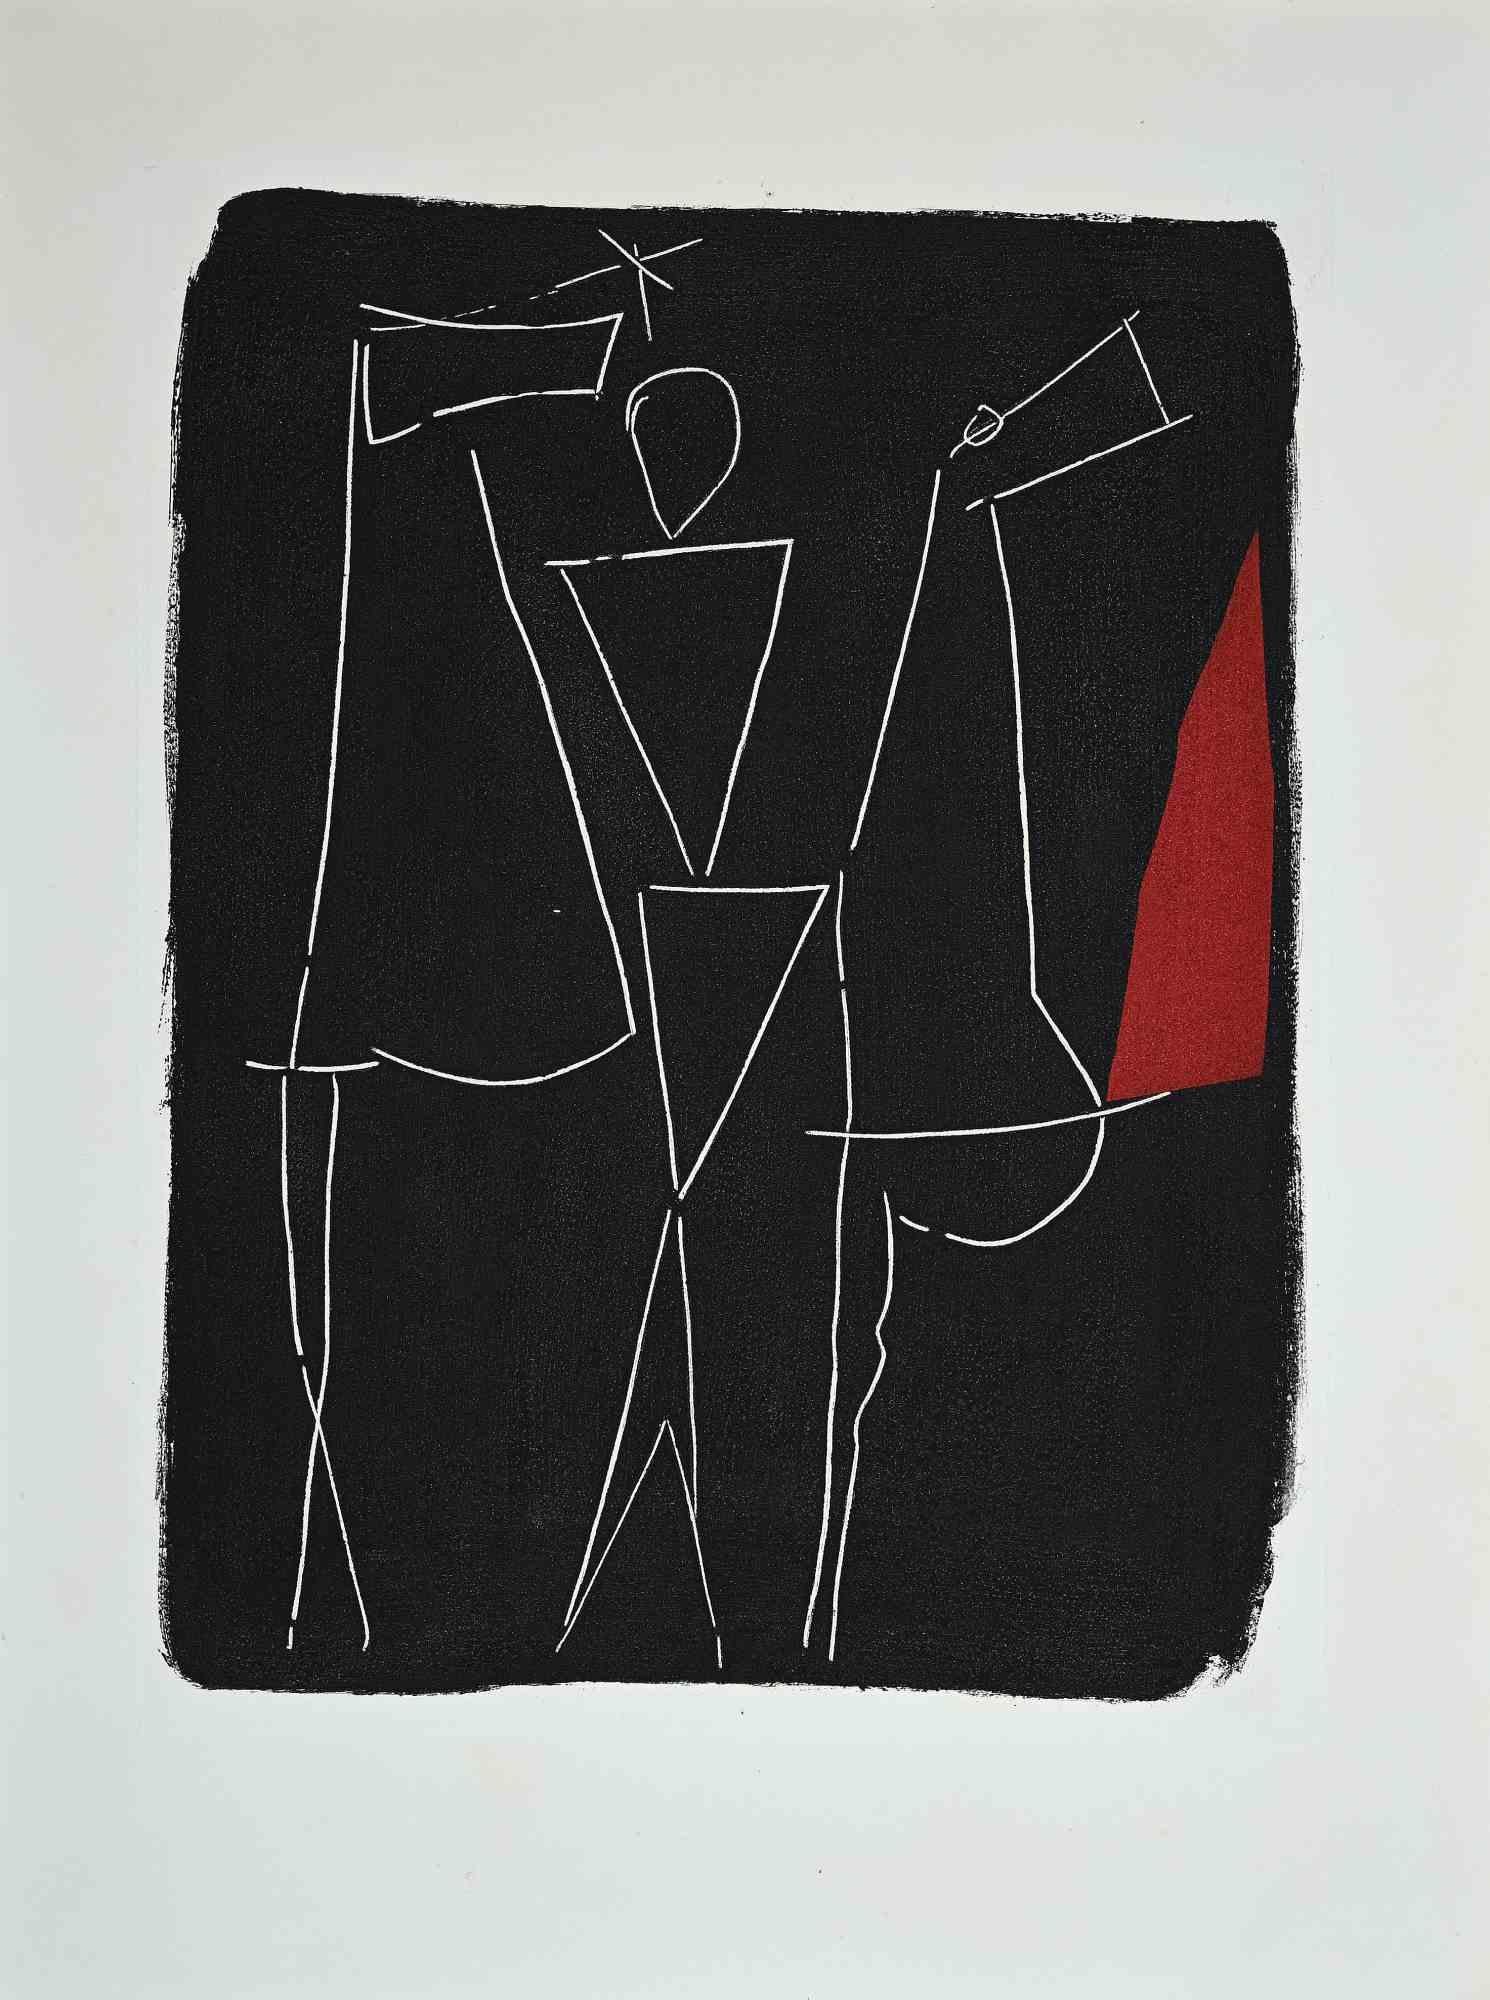 Knight and Horse is an original etching realized by Marino Marini in 1963.

Good conditions.

The artwork is depicted through strong strokes in a well-balanced composition.